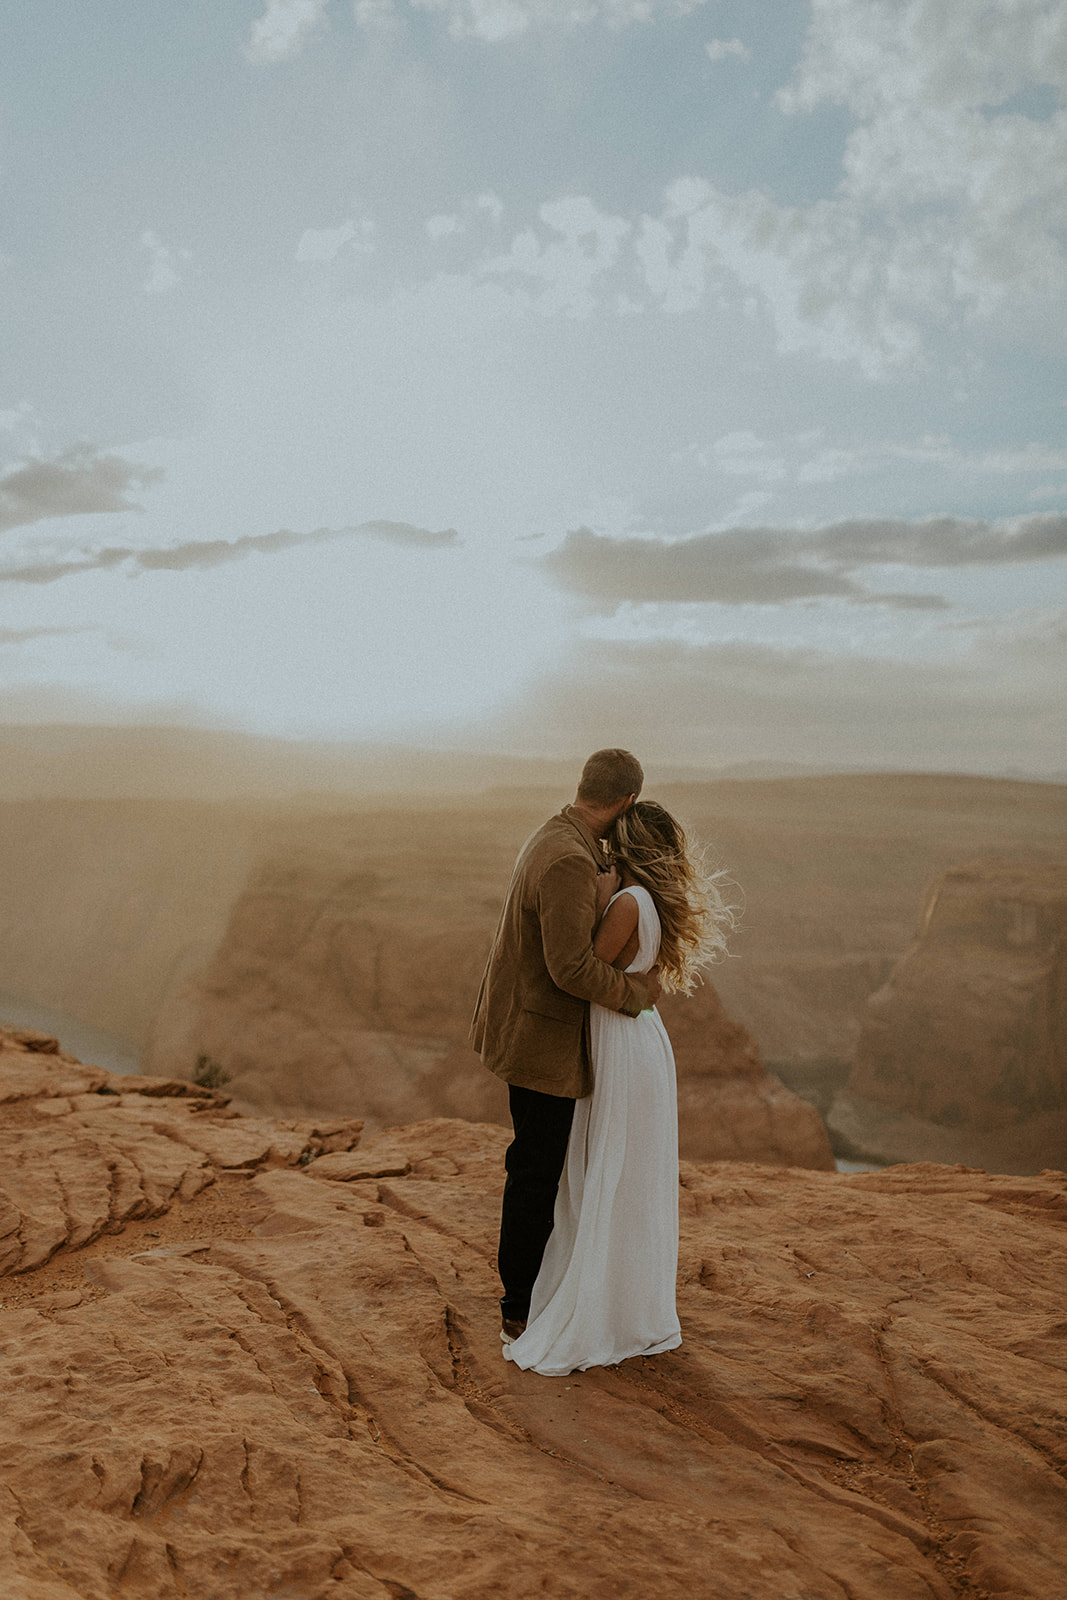 Arizona Destination Wedding: Ultimate Planning Guide. Bride and groom sharing an embrace.